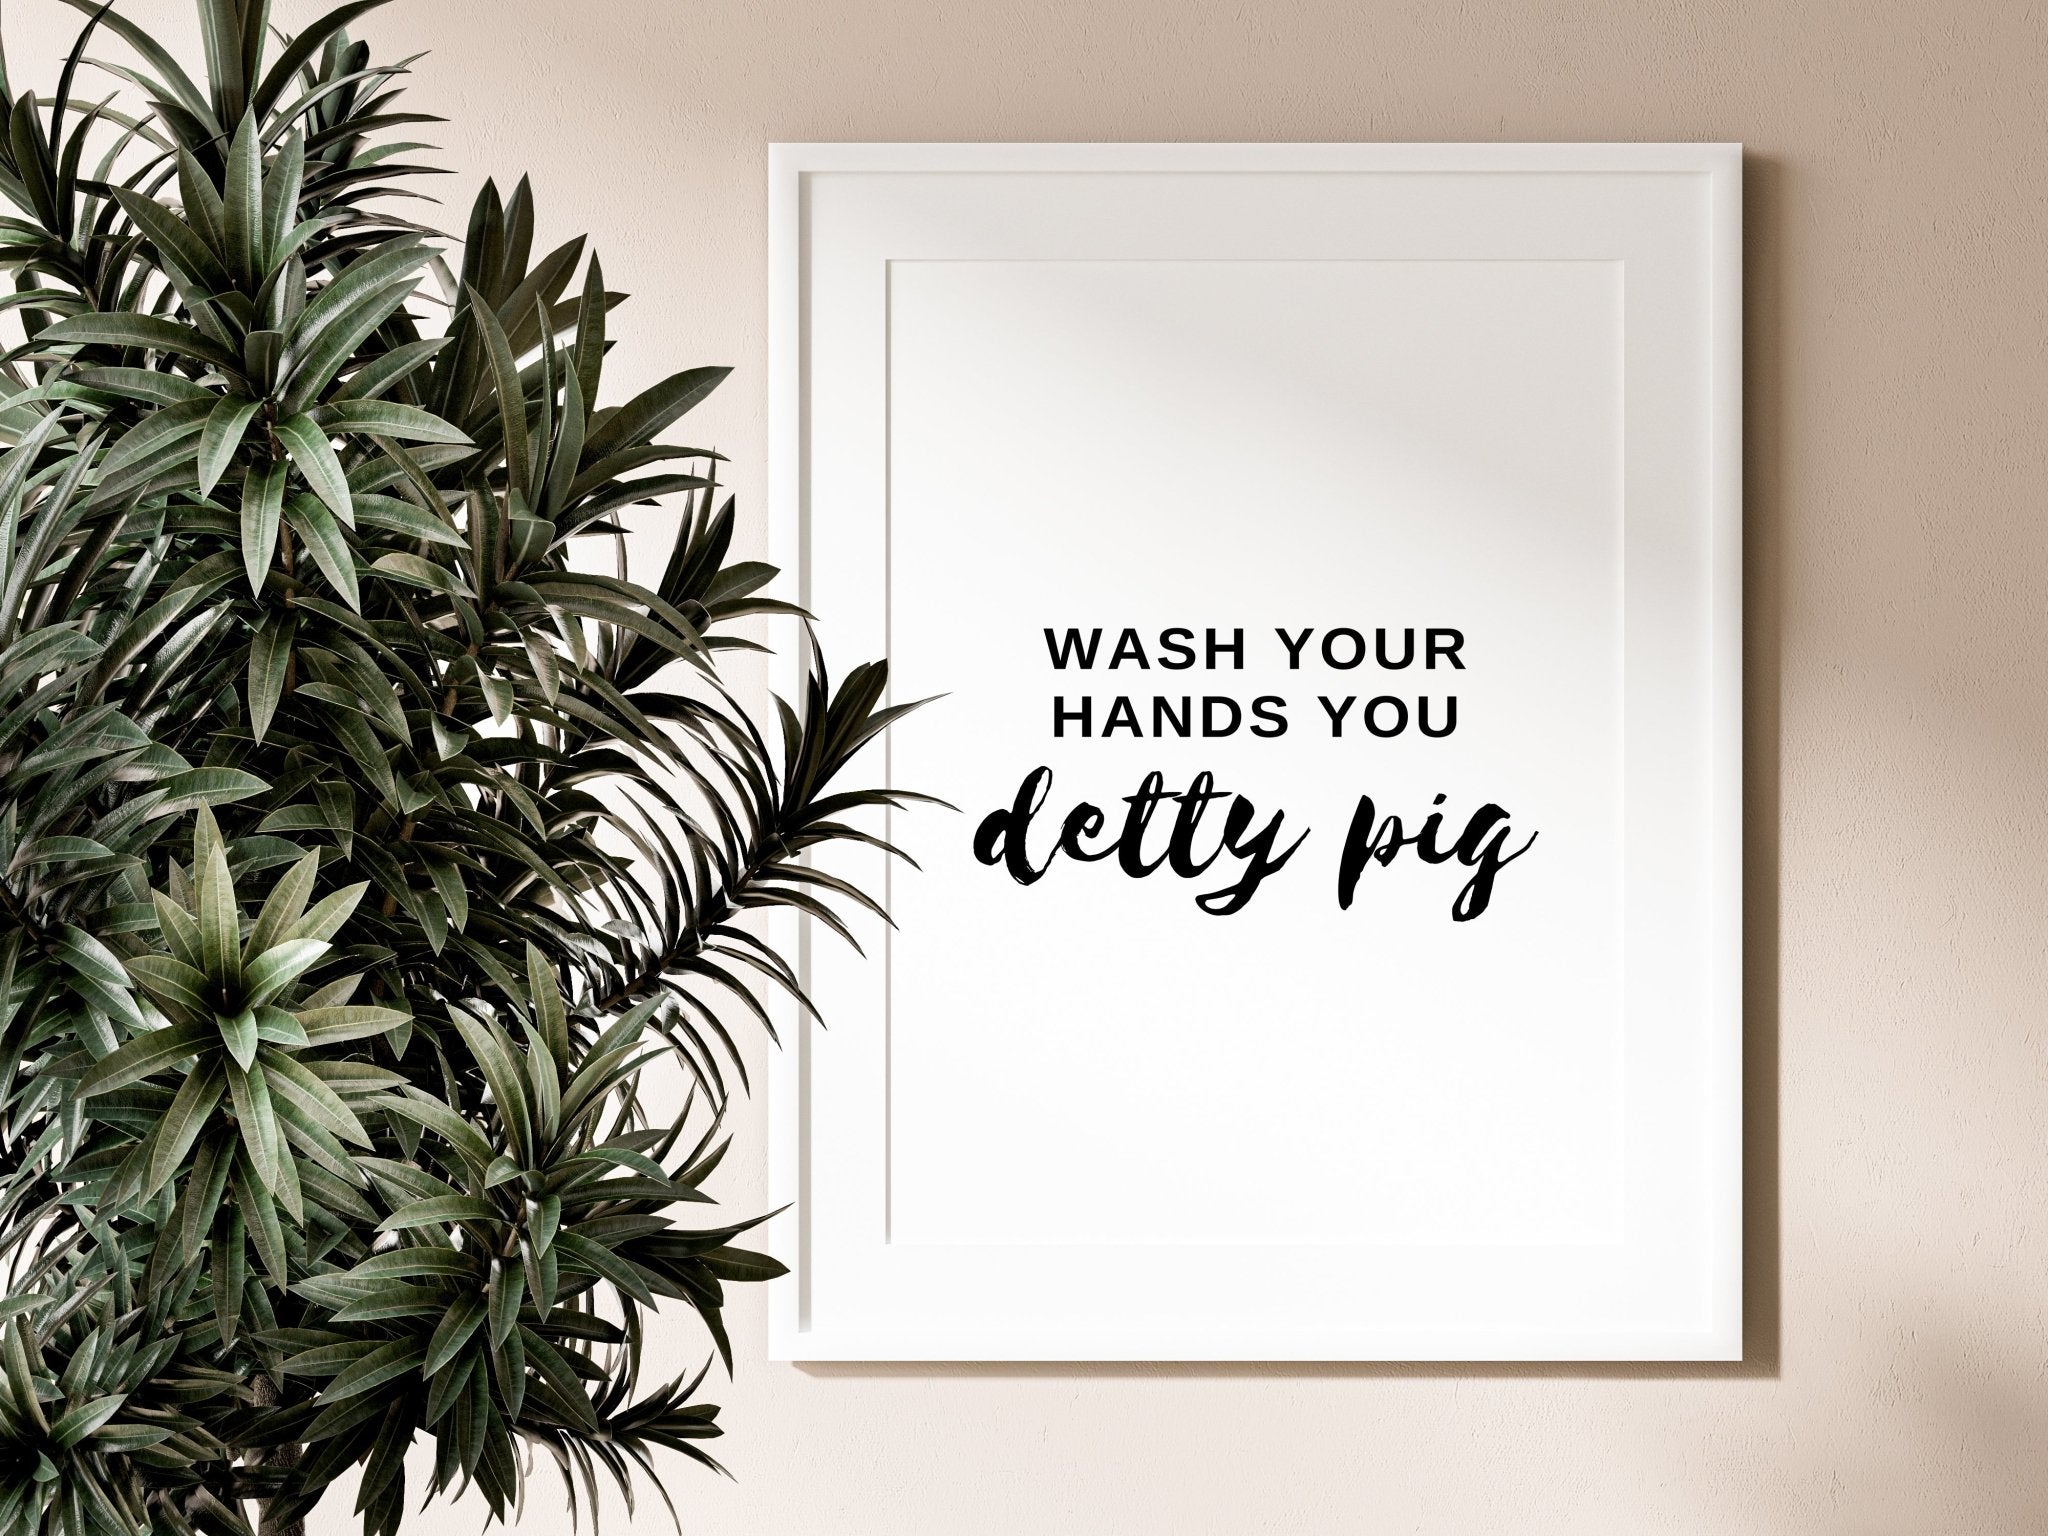 Wash Your Hands You Detty Pig Print